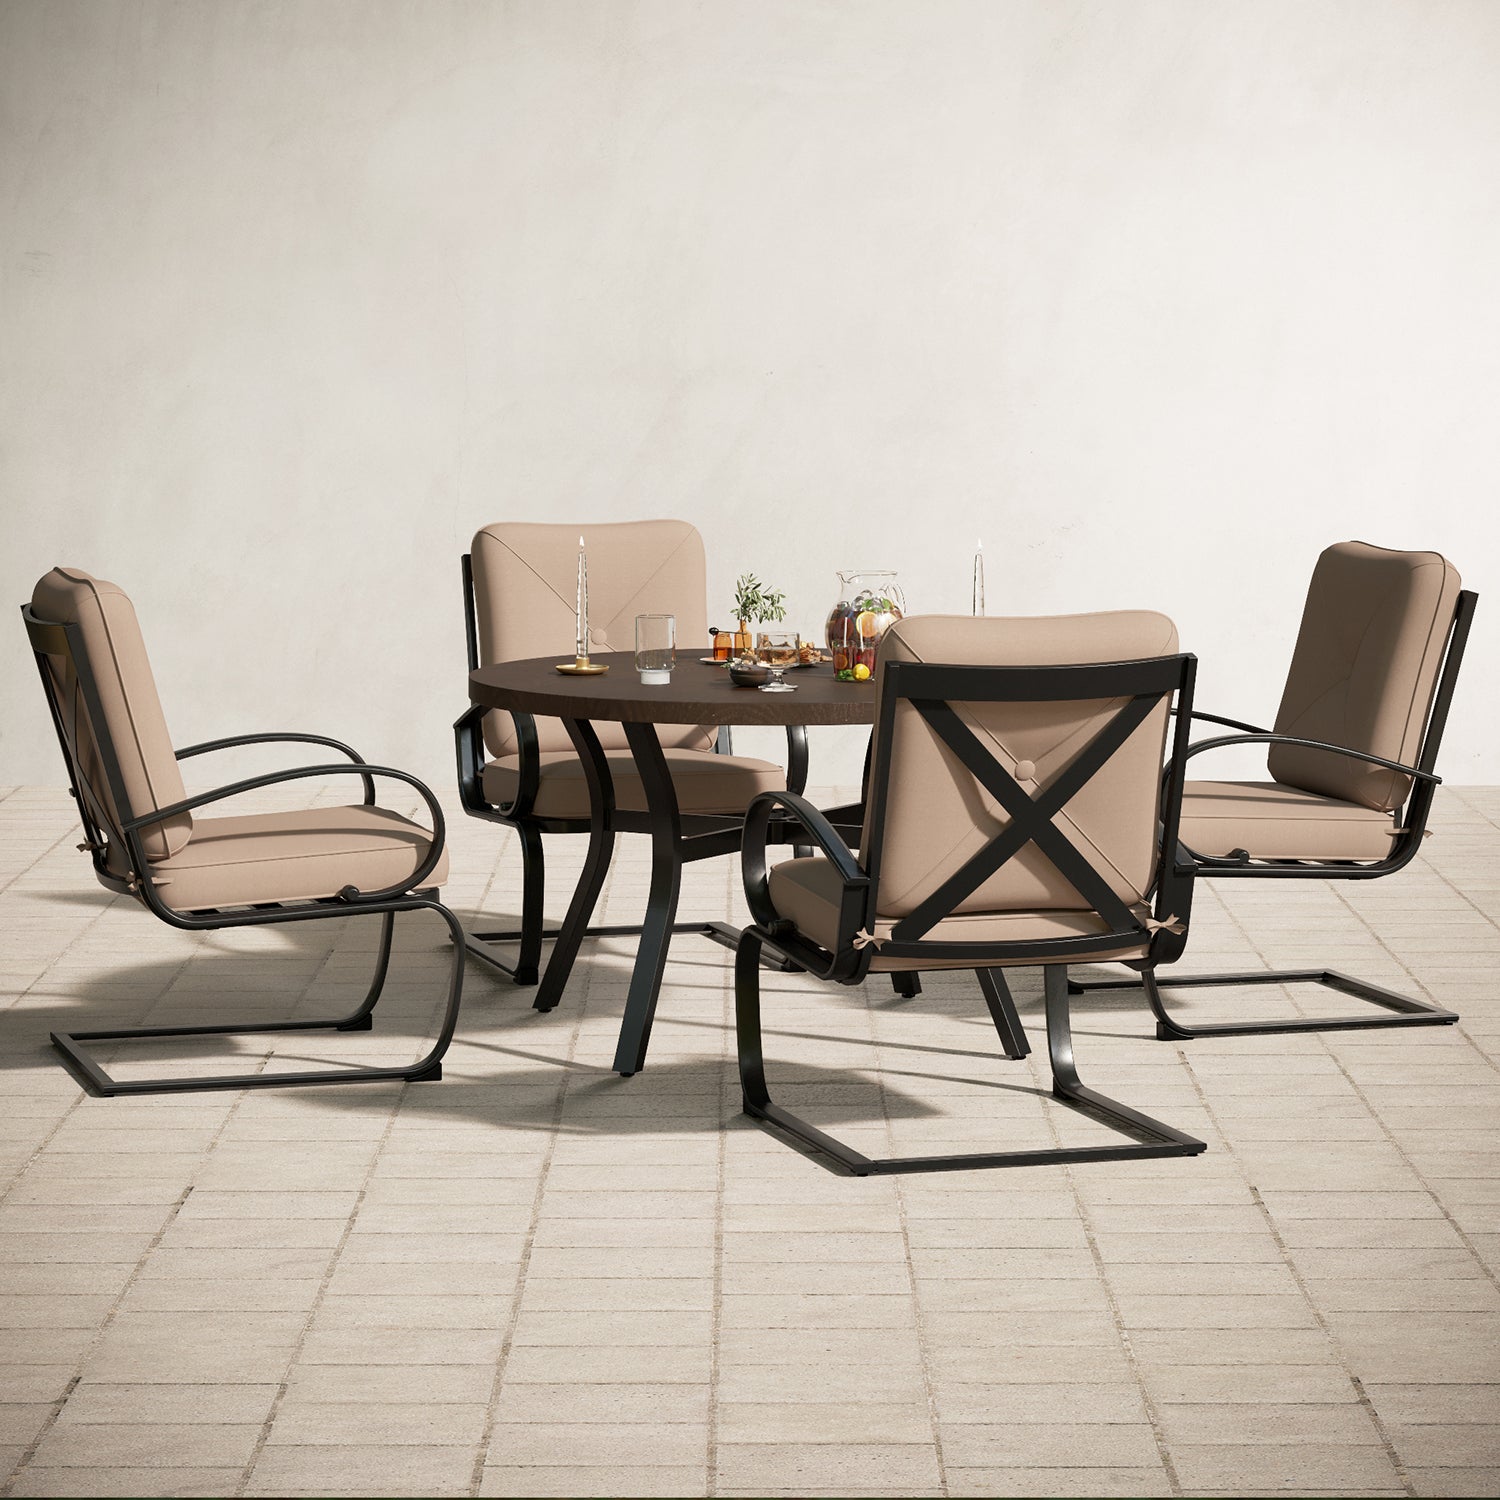 Sophia & William Wood-look Patterned Round Table & C-Spring Cushioned Chairs 5-Piece Outdoor Dining Set